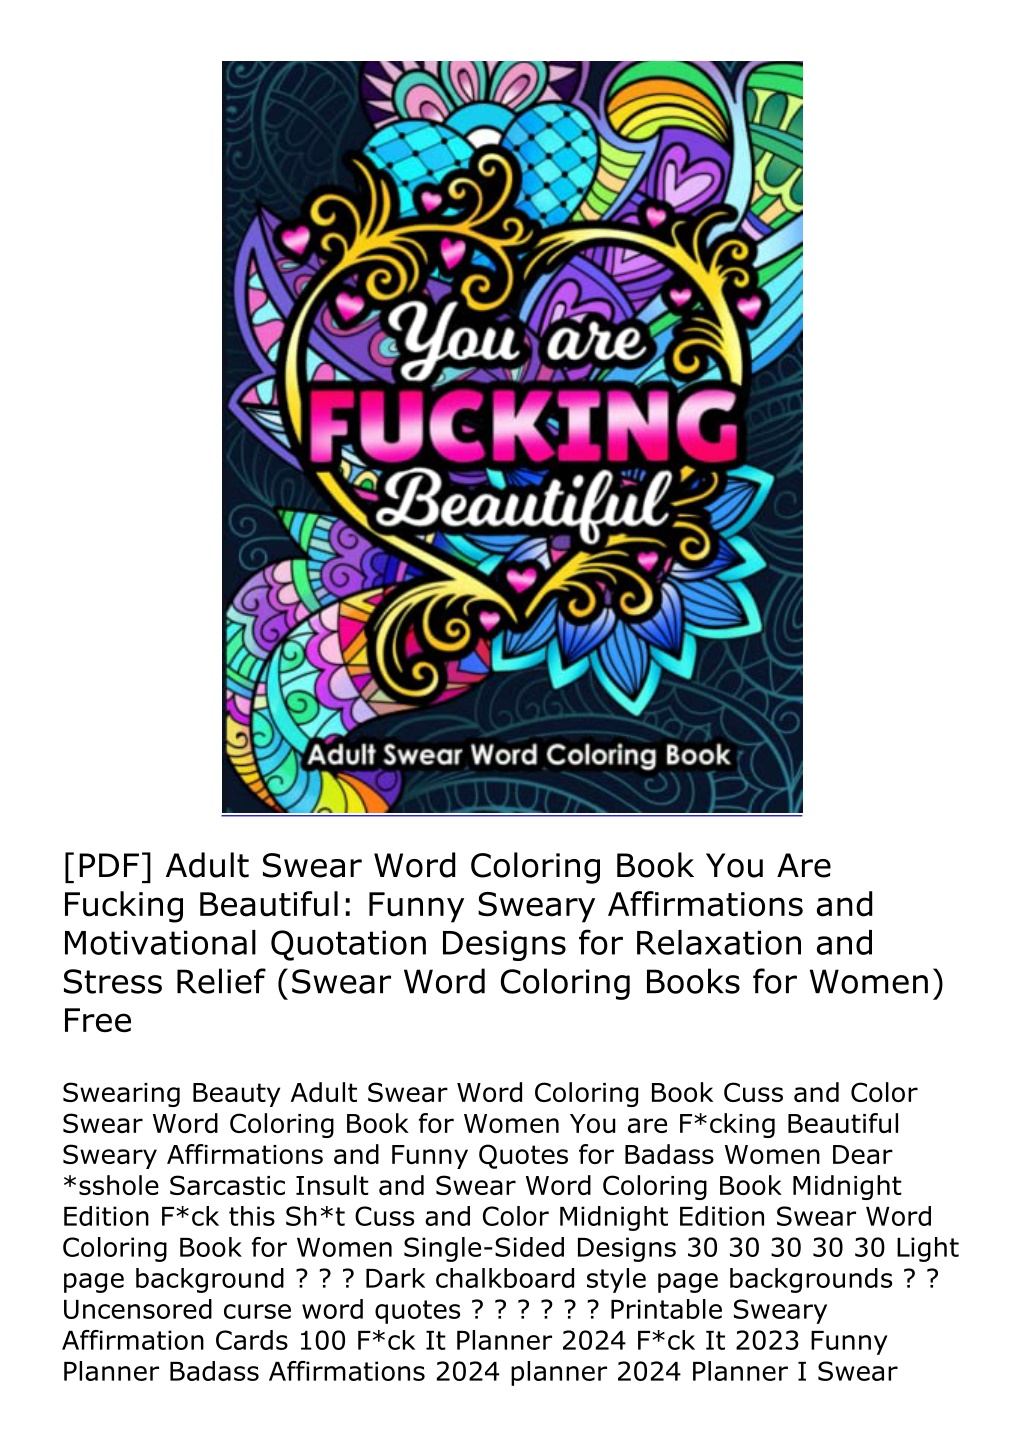 Adult Swear Word Coloring Book You Are Fucking Beautiful: Funny Sweary Affirmations and Motivational Quotation Designs for Relaxation and Stress Relief [Book]